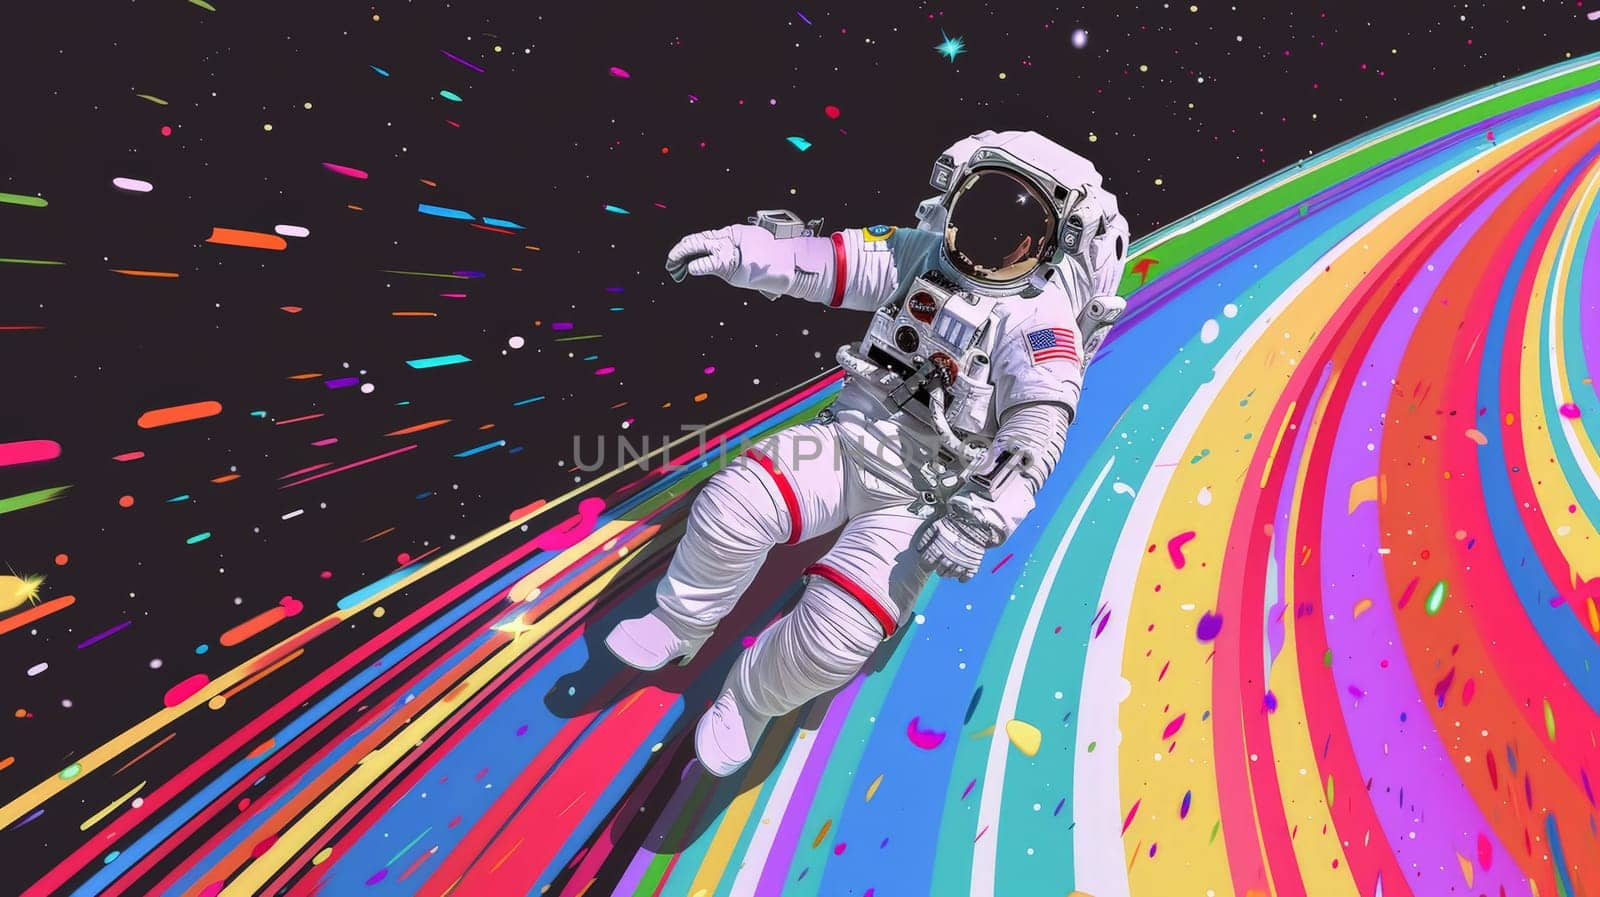 Abstract wallpaper of an astronaut in space with rainbow, Colorful art of astronaut in the space.